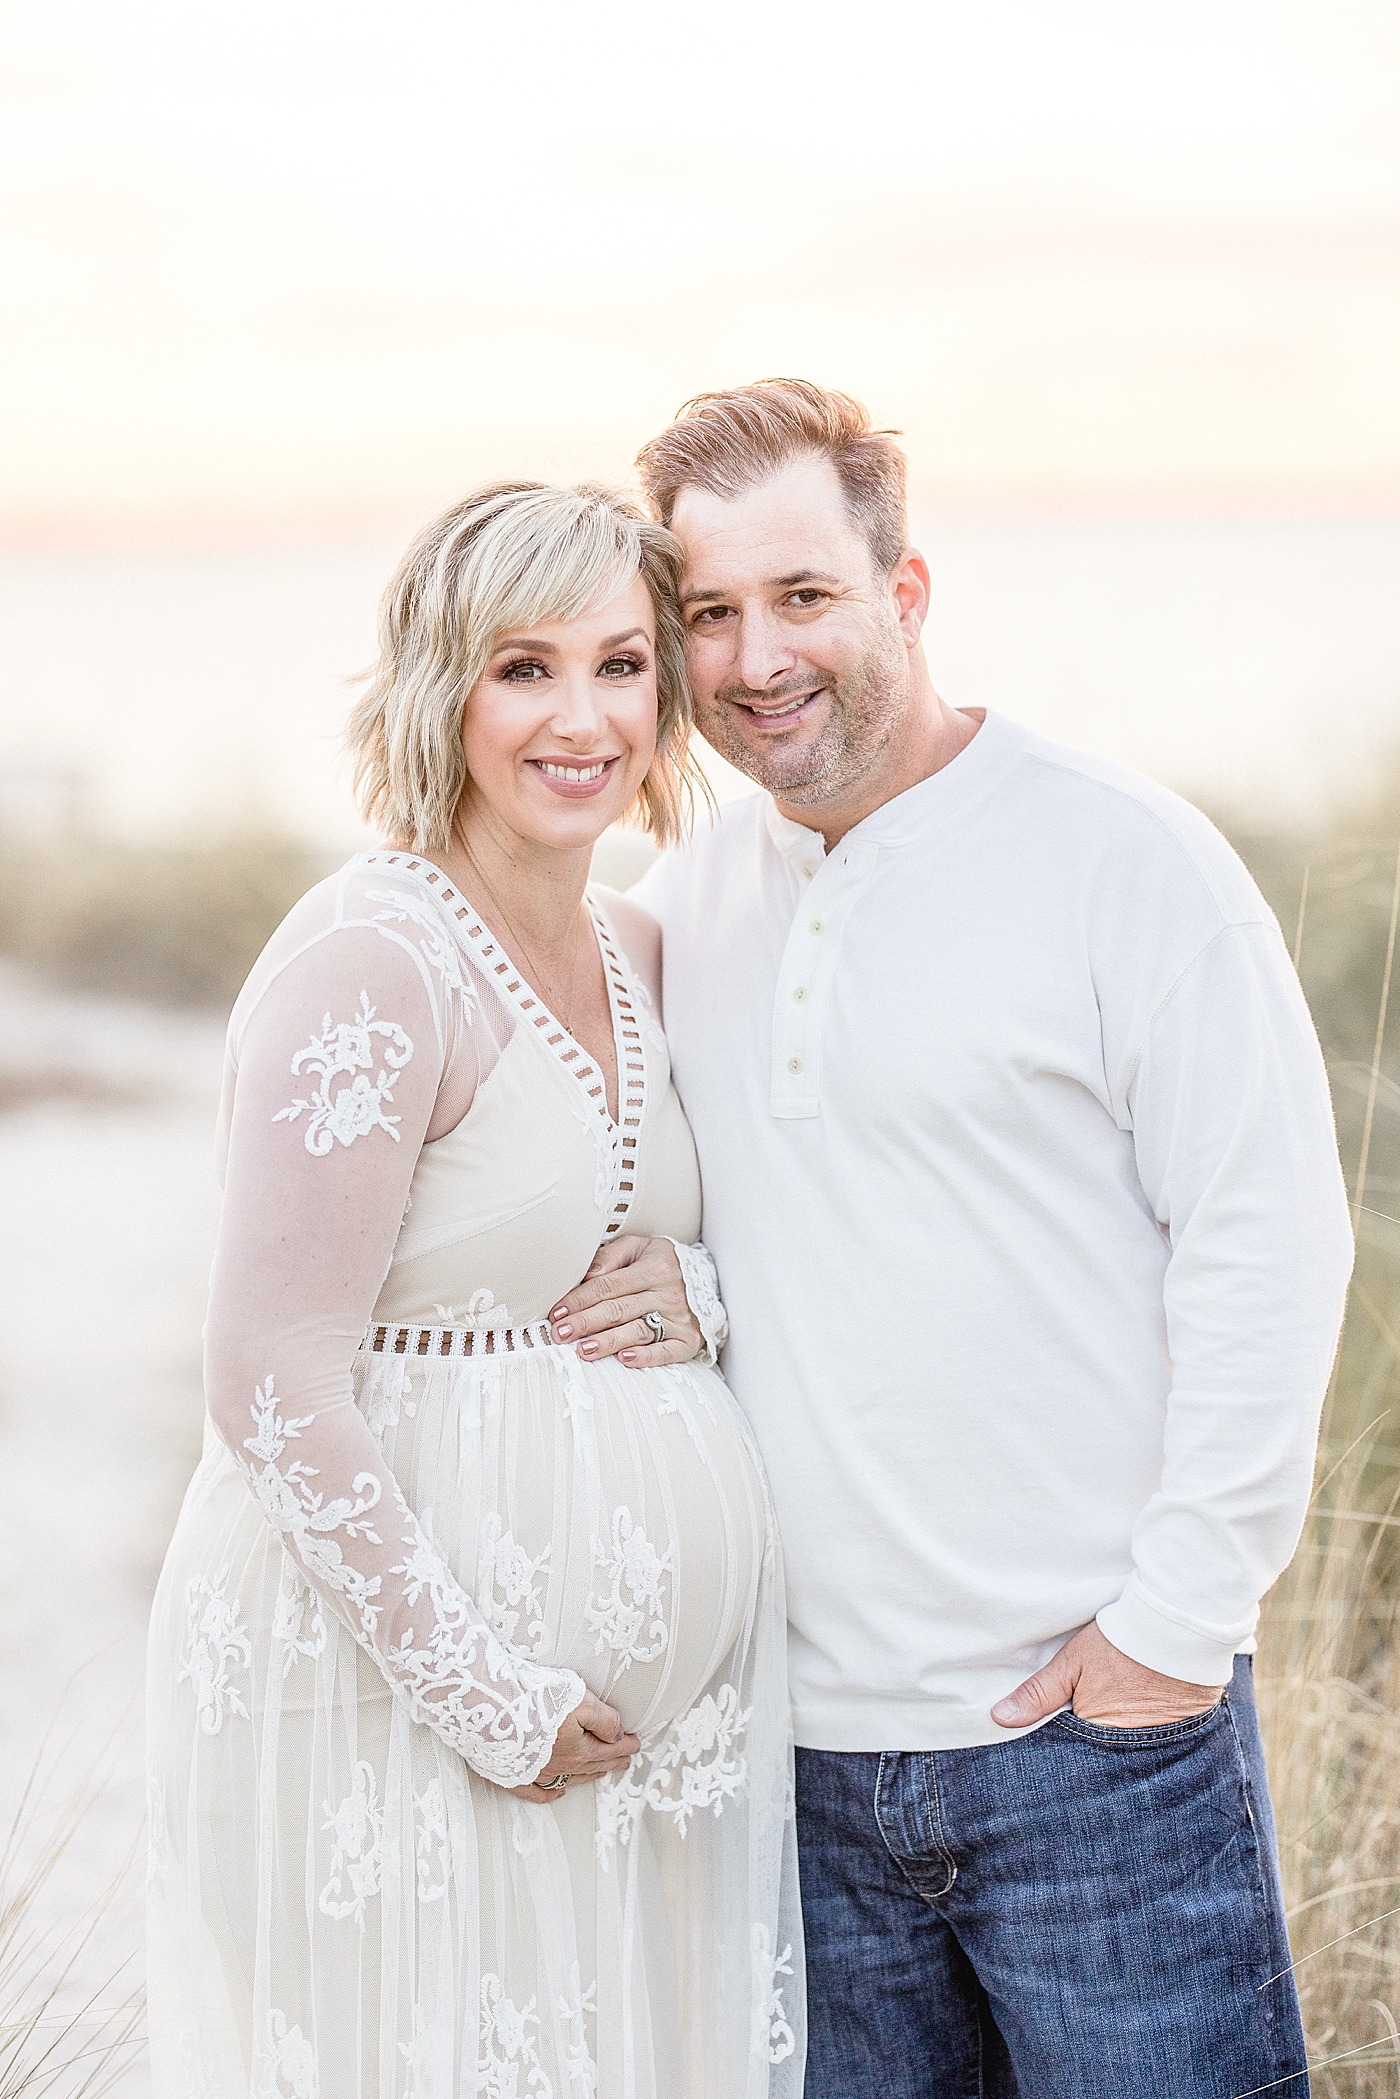 Mom and Dad celebrate third pregnancy, a baby girl, with maternity photos with Brittany Elise Photography.